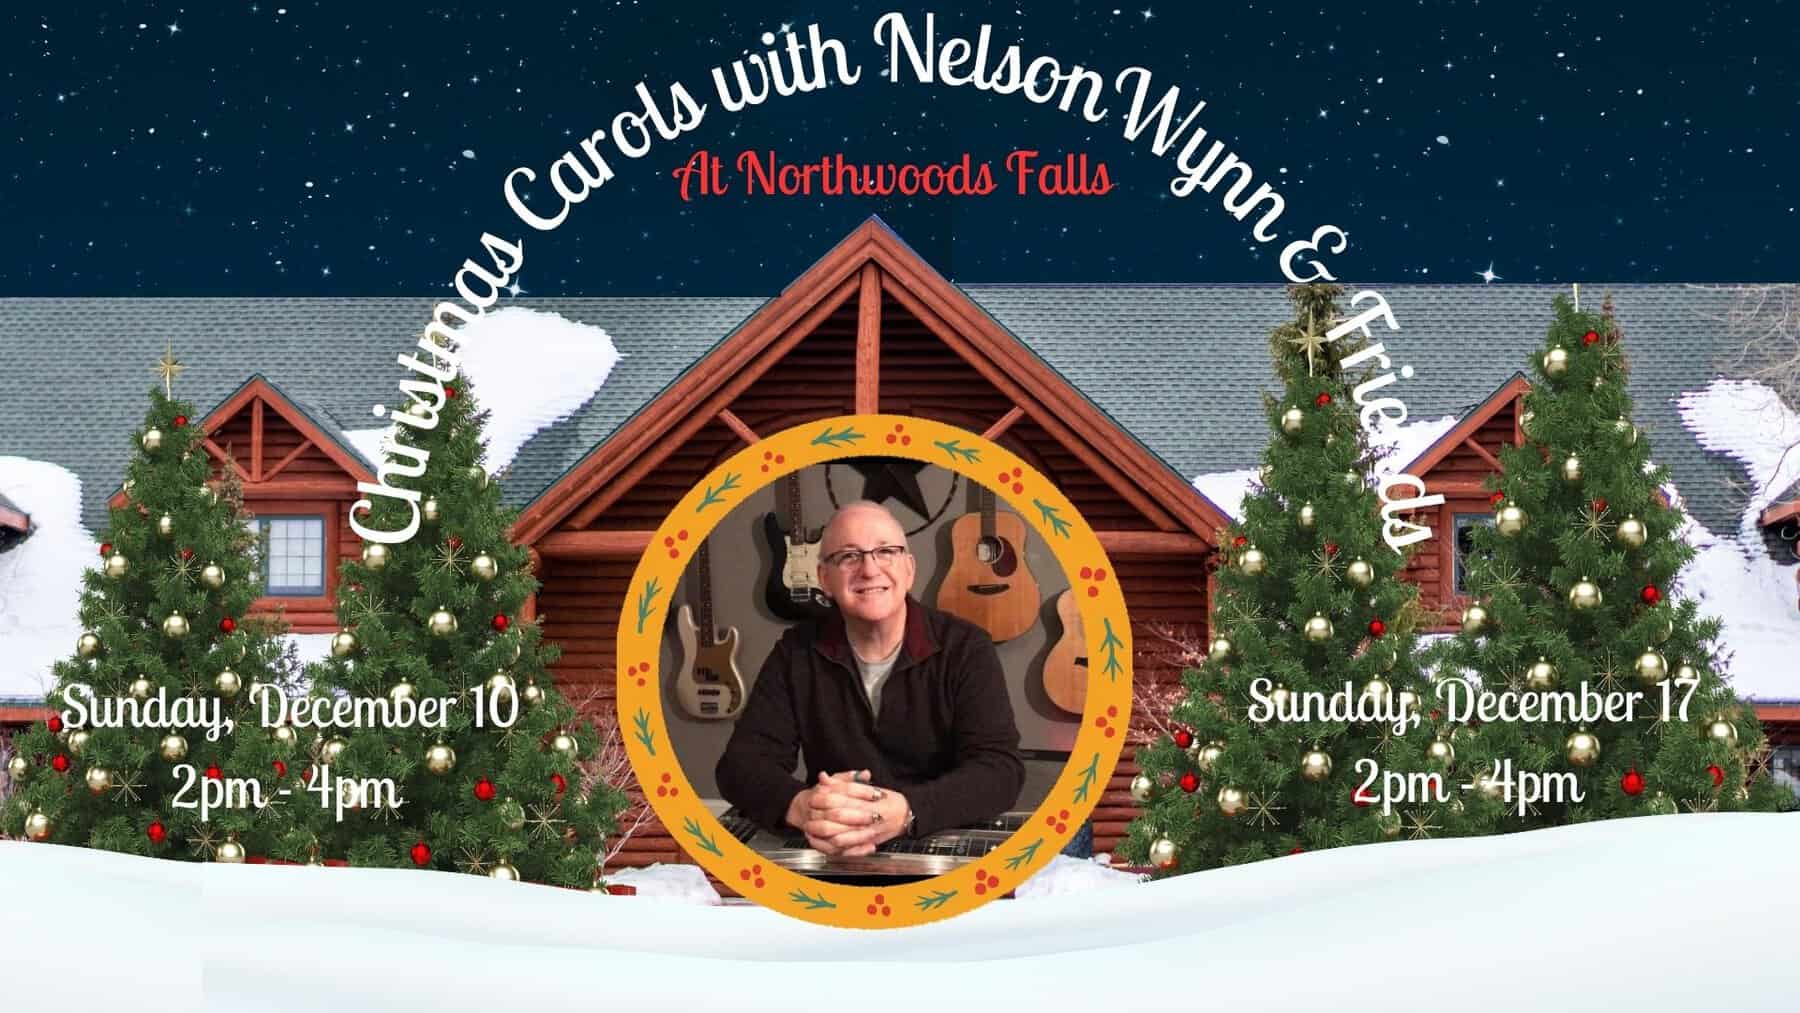 Copy of Merry Christmas from Northwoods Falls! (1)